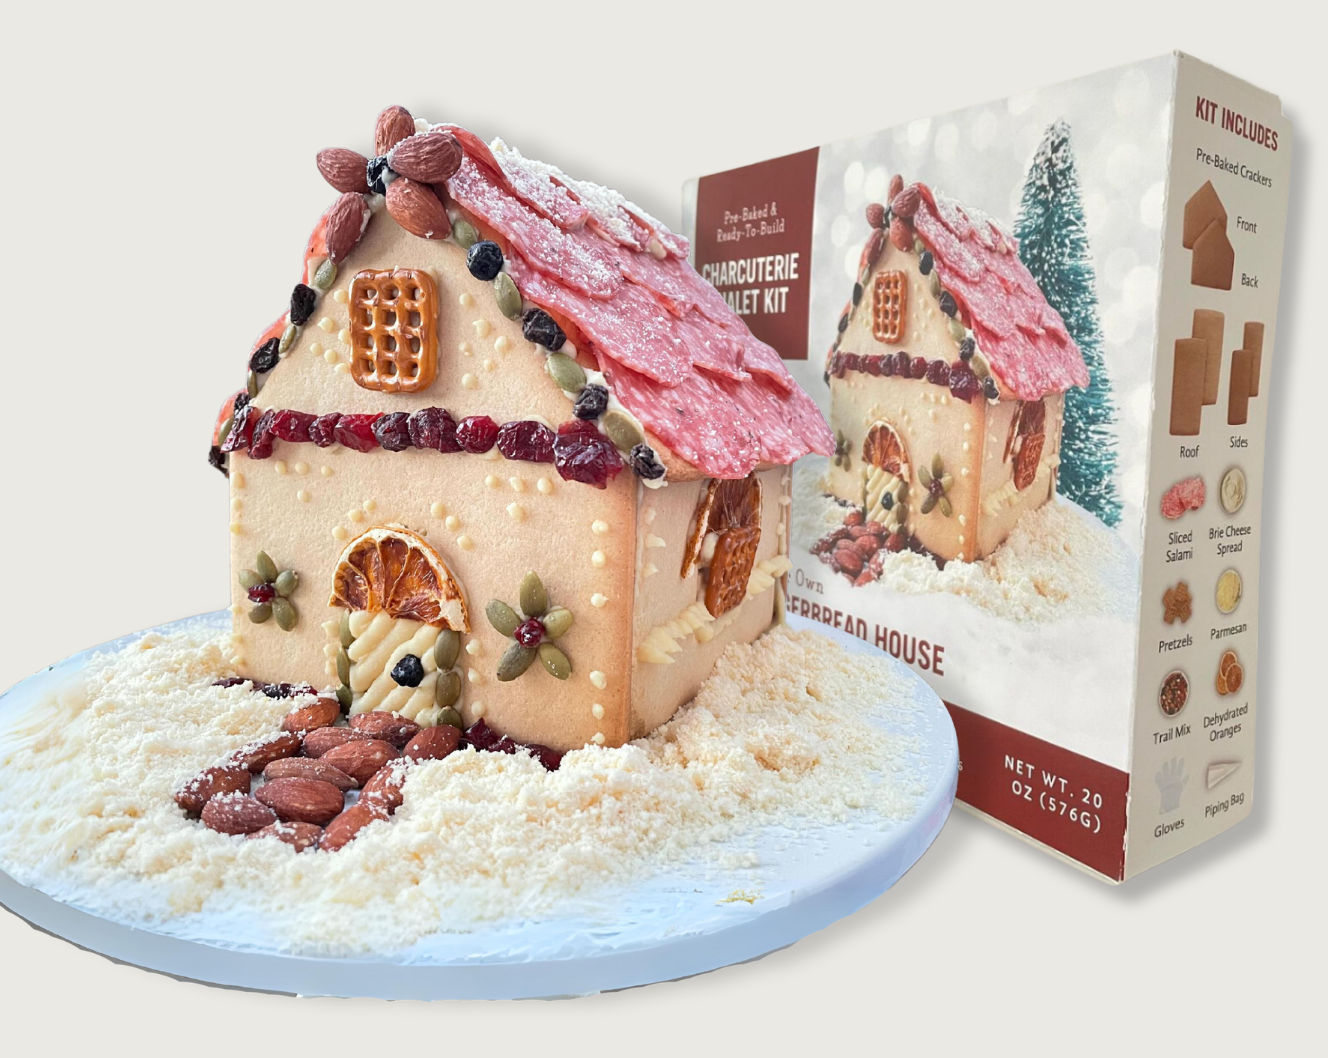 CHARCUTERIE CHALET KIT (ALL NEW!)